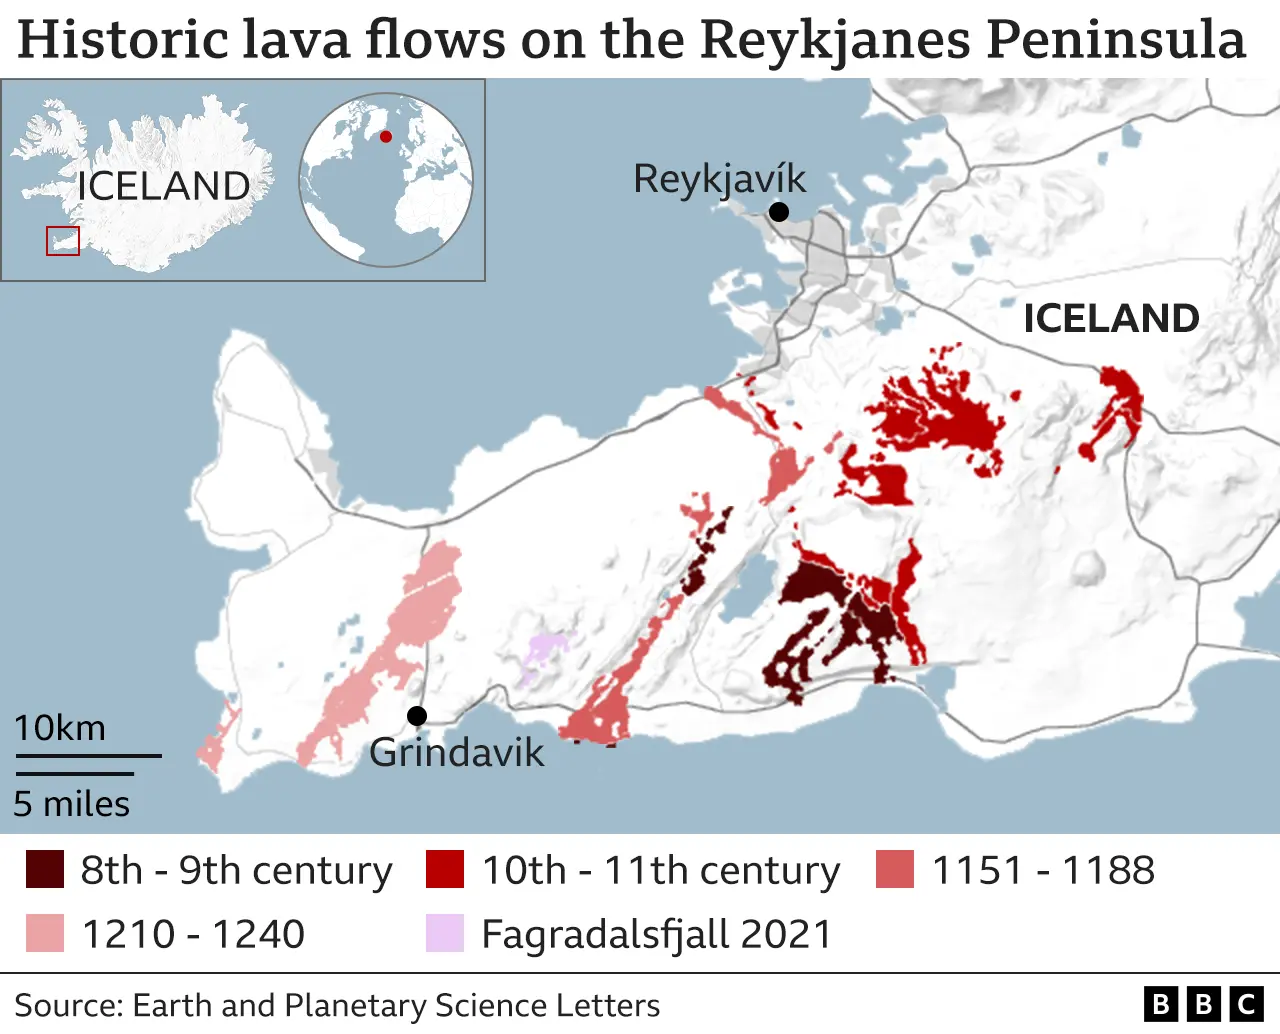 BBC drawing titled "Historic lava flows on the Reykjanes Peninsula"Which shows the number of flows here dating back to the 8th century